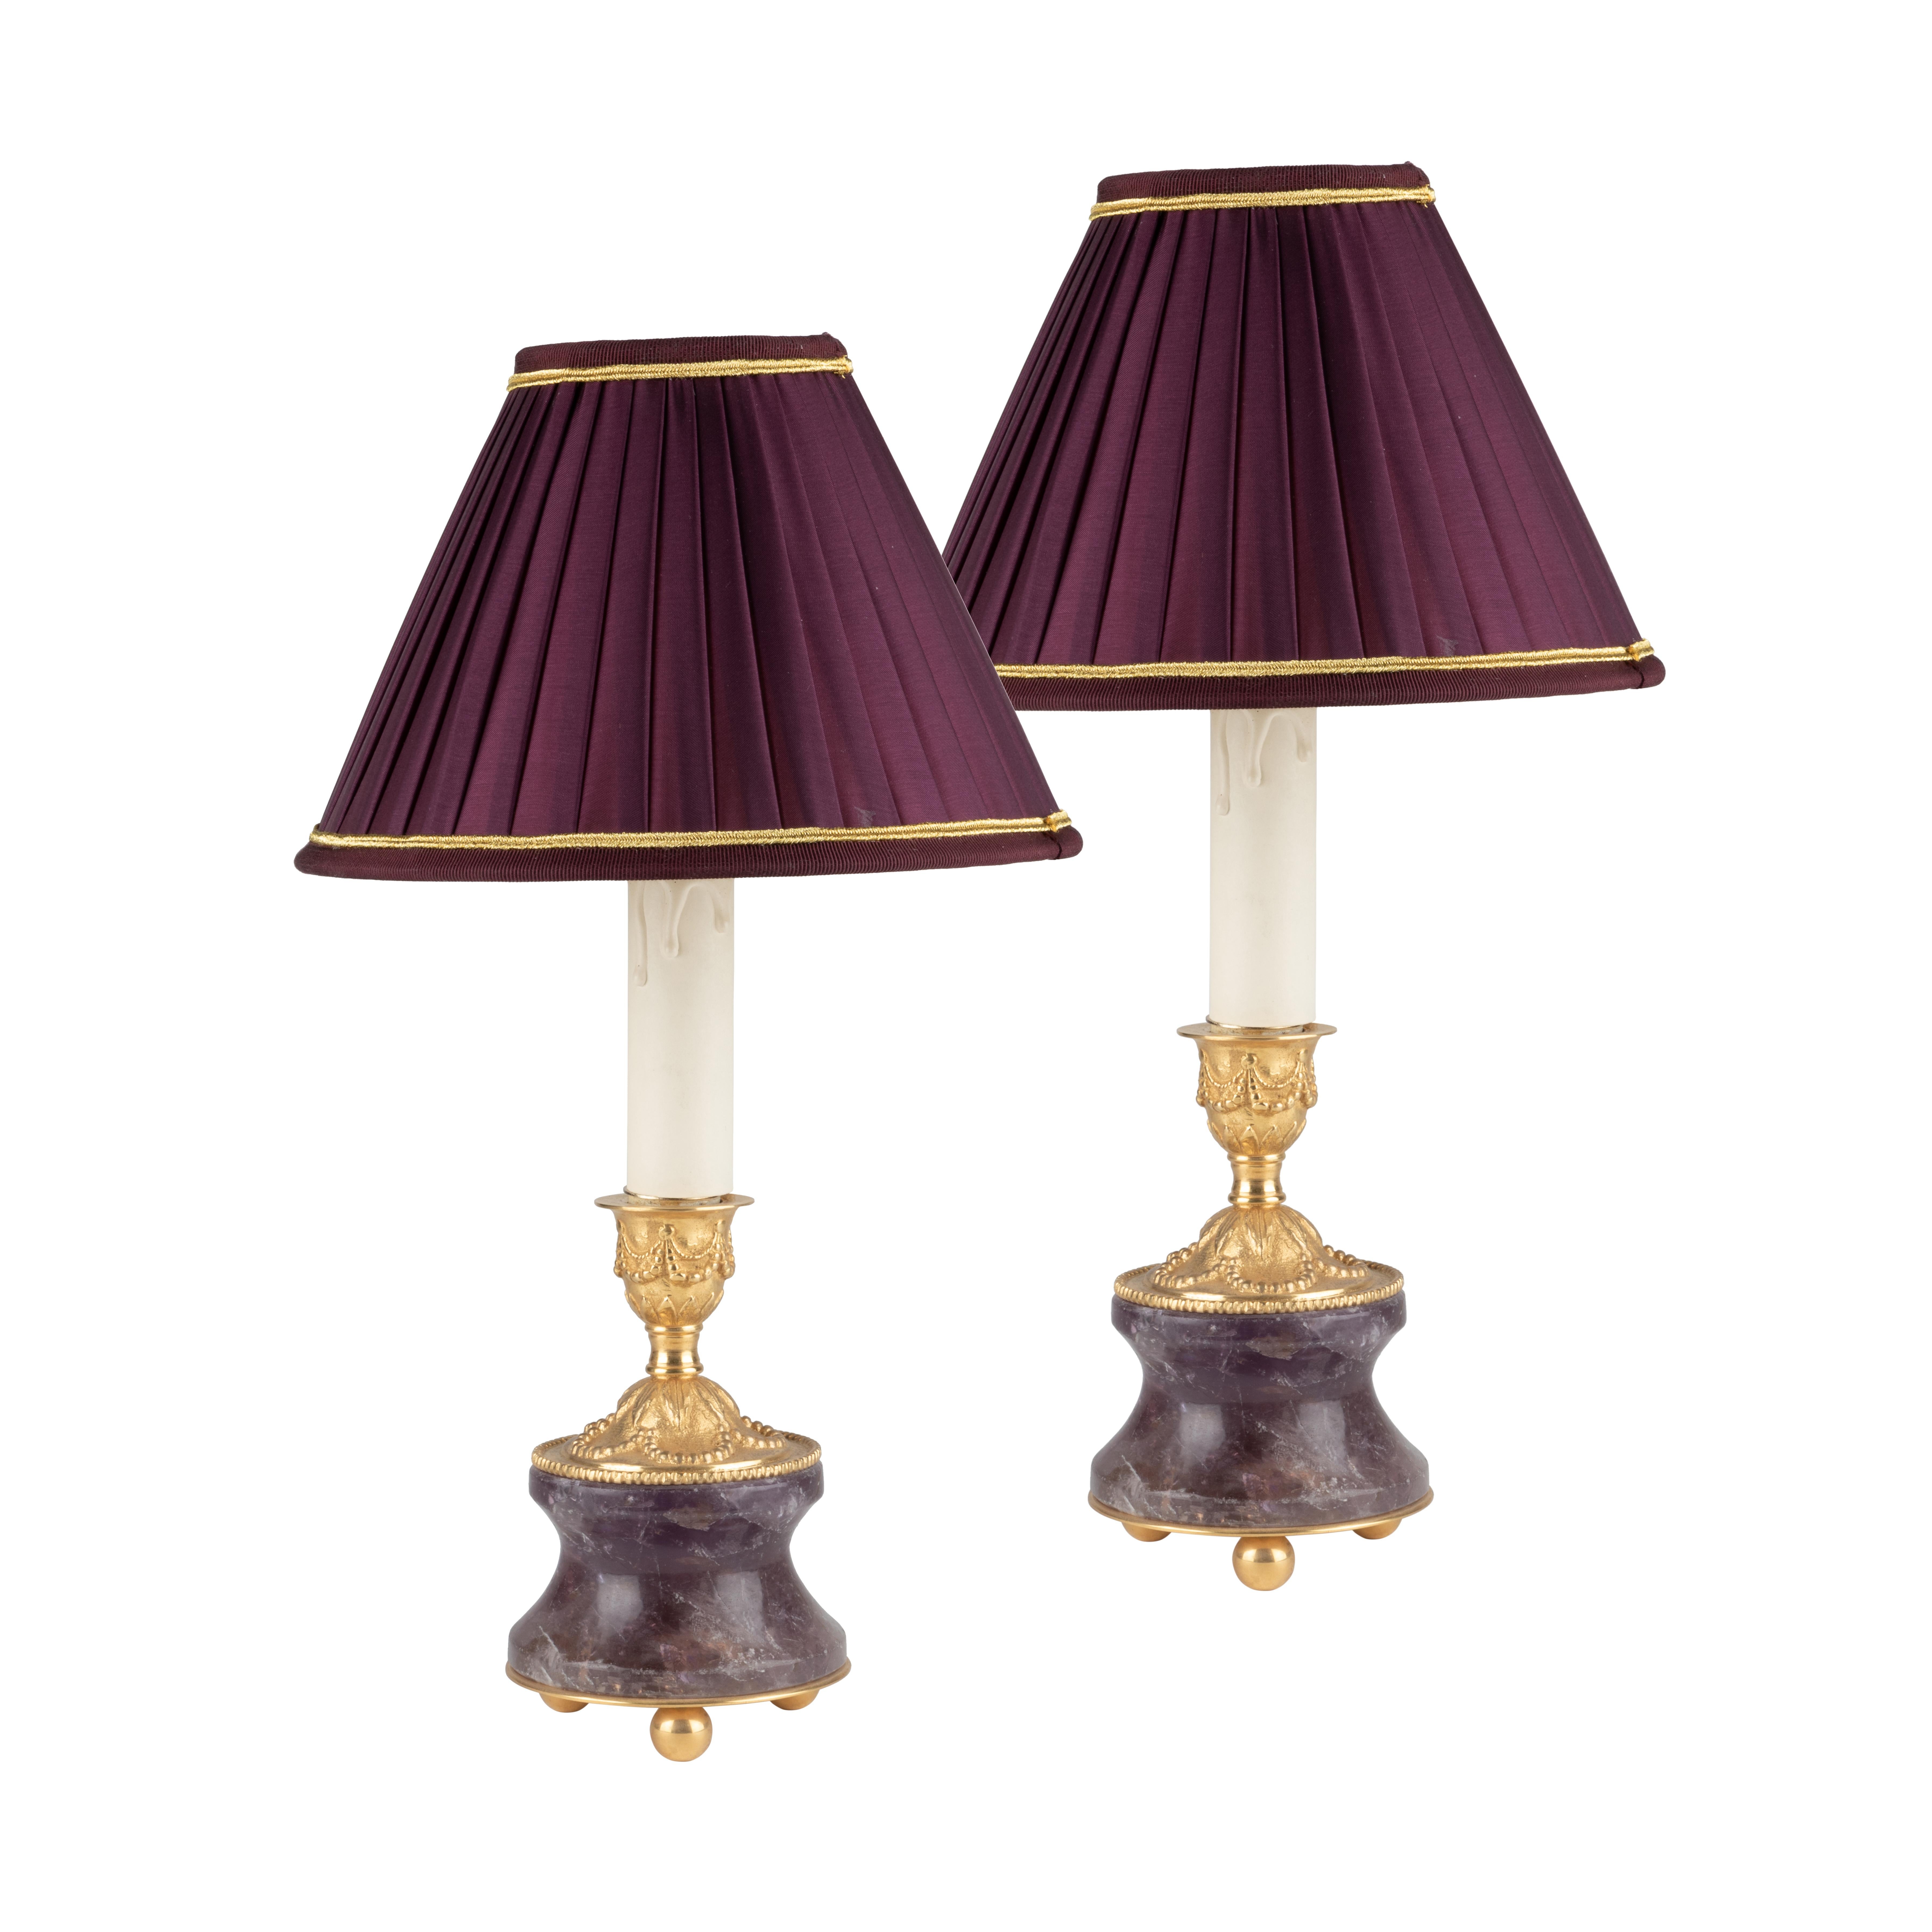 Amethyst candlesticks-lamps by Alexandre Vossion.
Made in Paris.
 